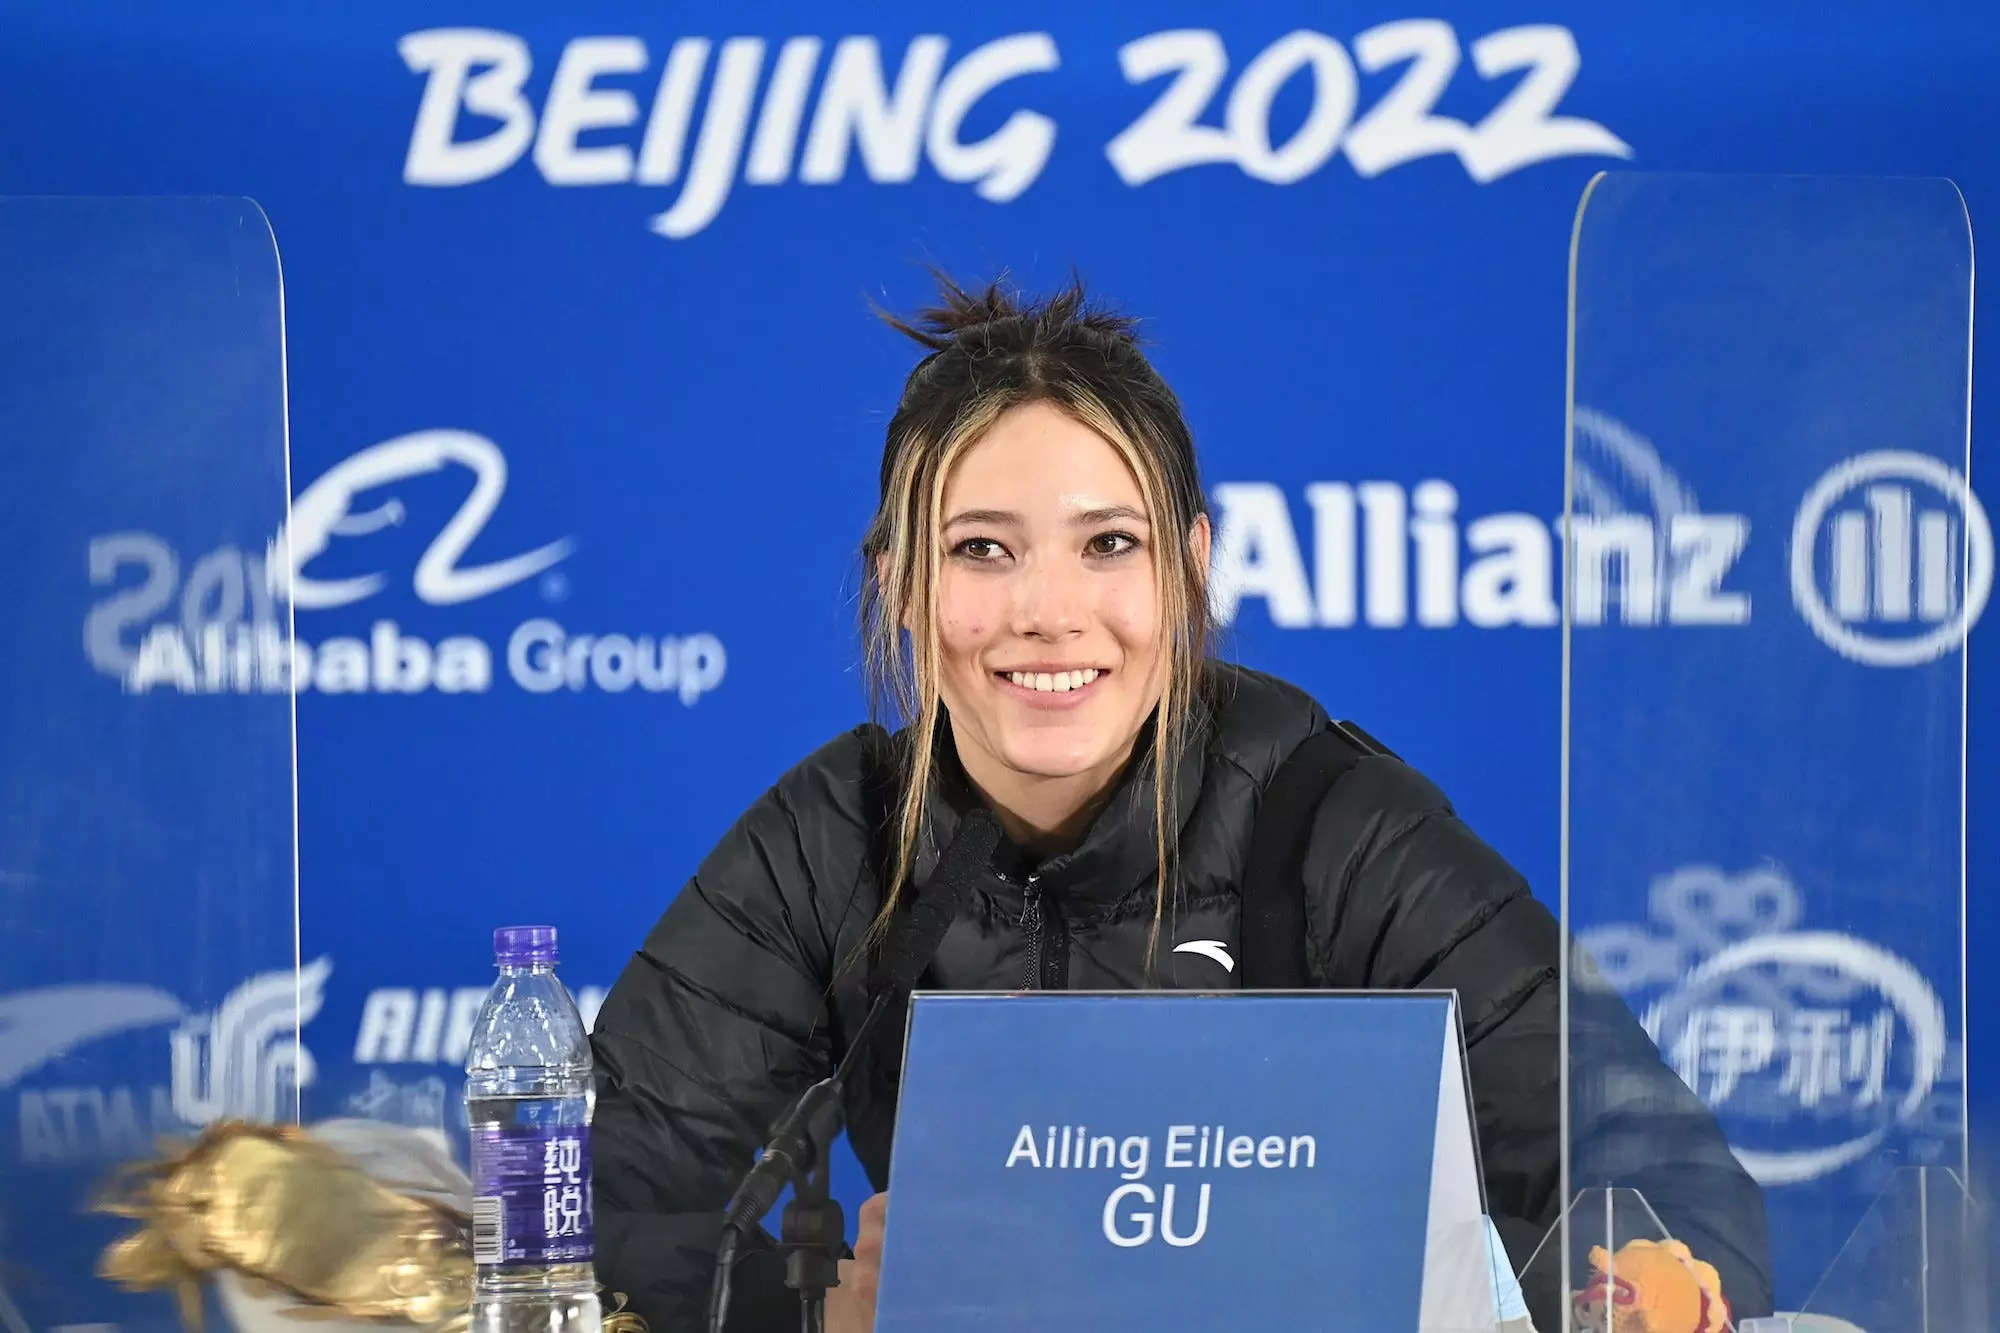 Teenage ski sensation Eileen Gu twice skirted questions about whether she  has renounced her US citizenship to compete for China